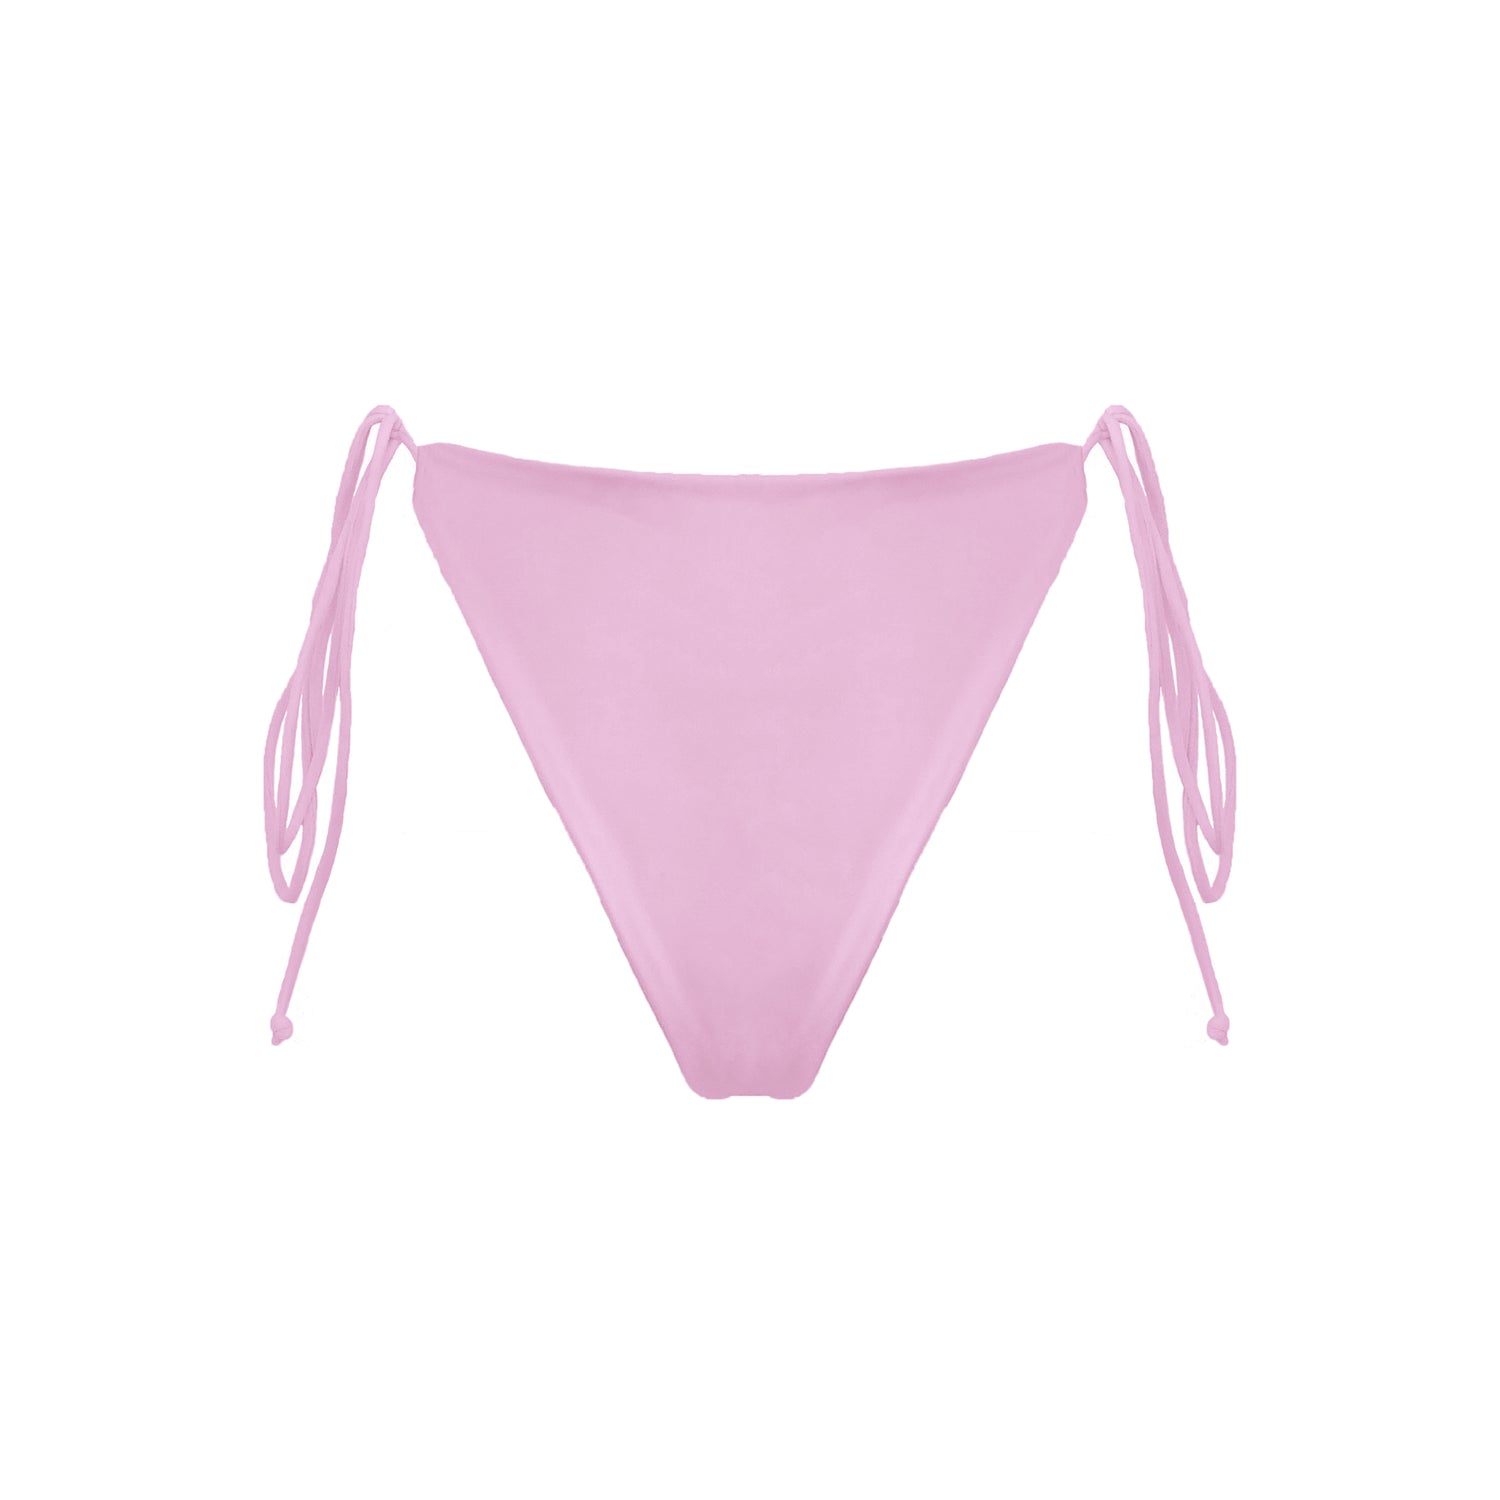 Back view pastel pink Ravello bikini bottom with adjustable side tie straps and cheeky bum coverage.